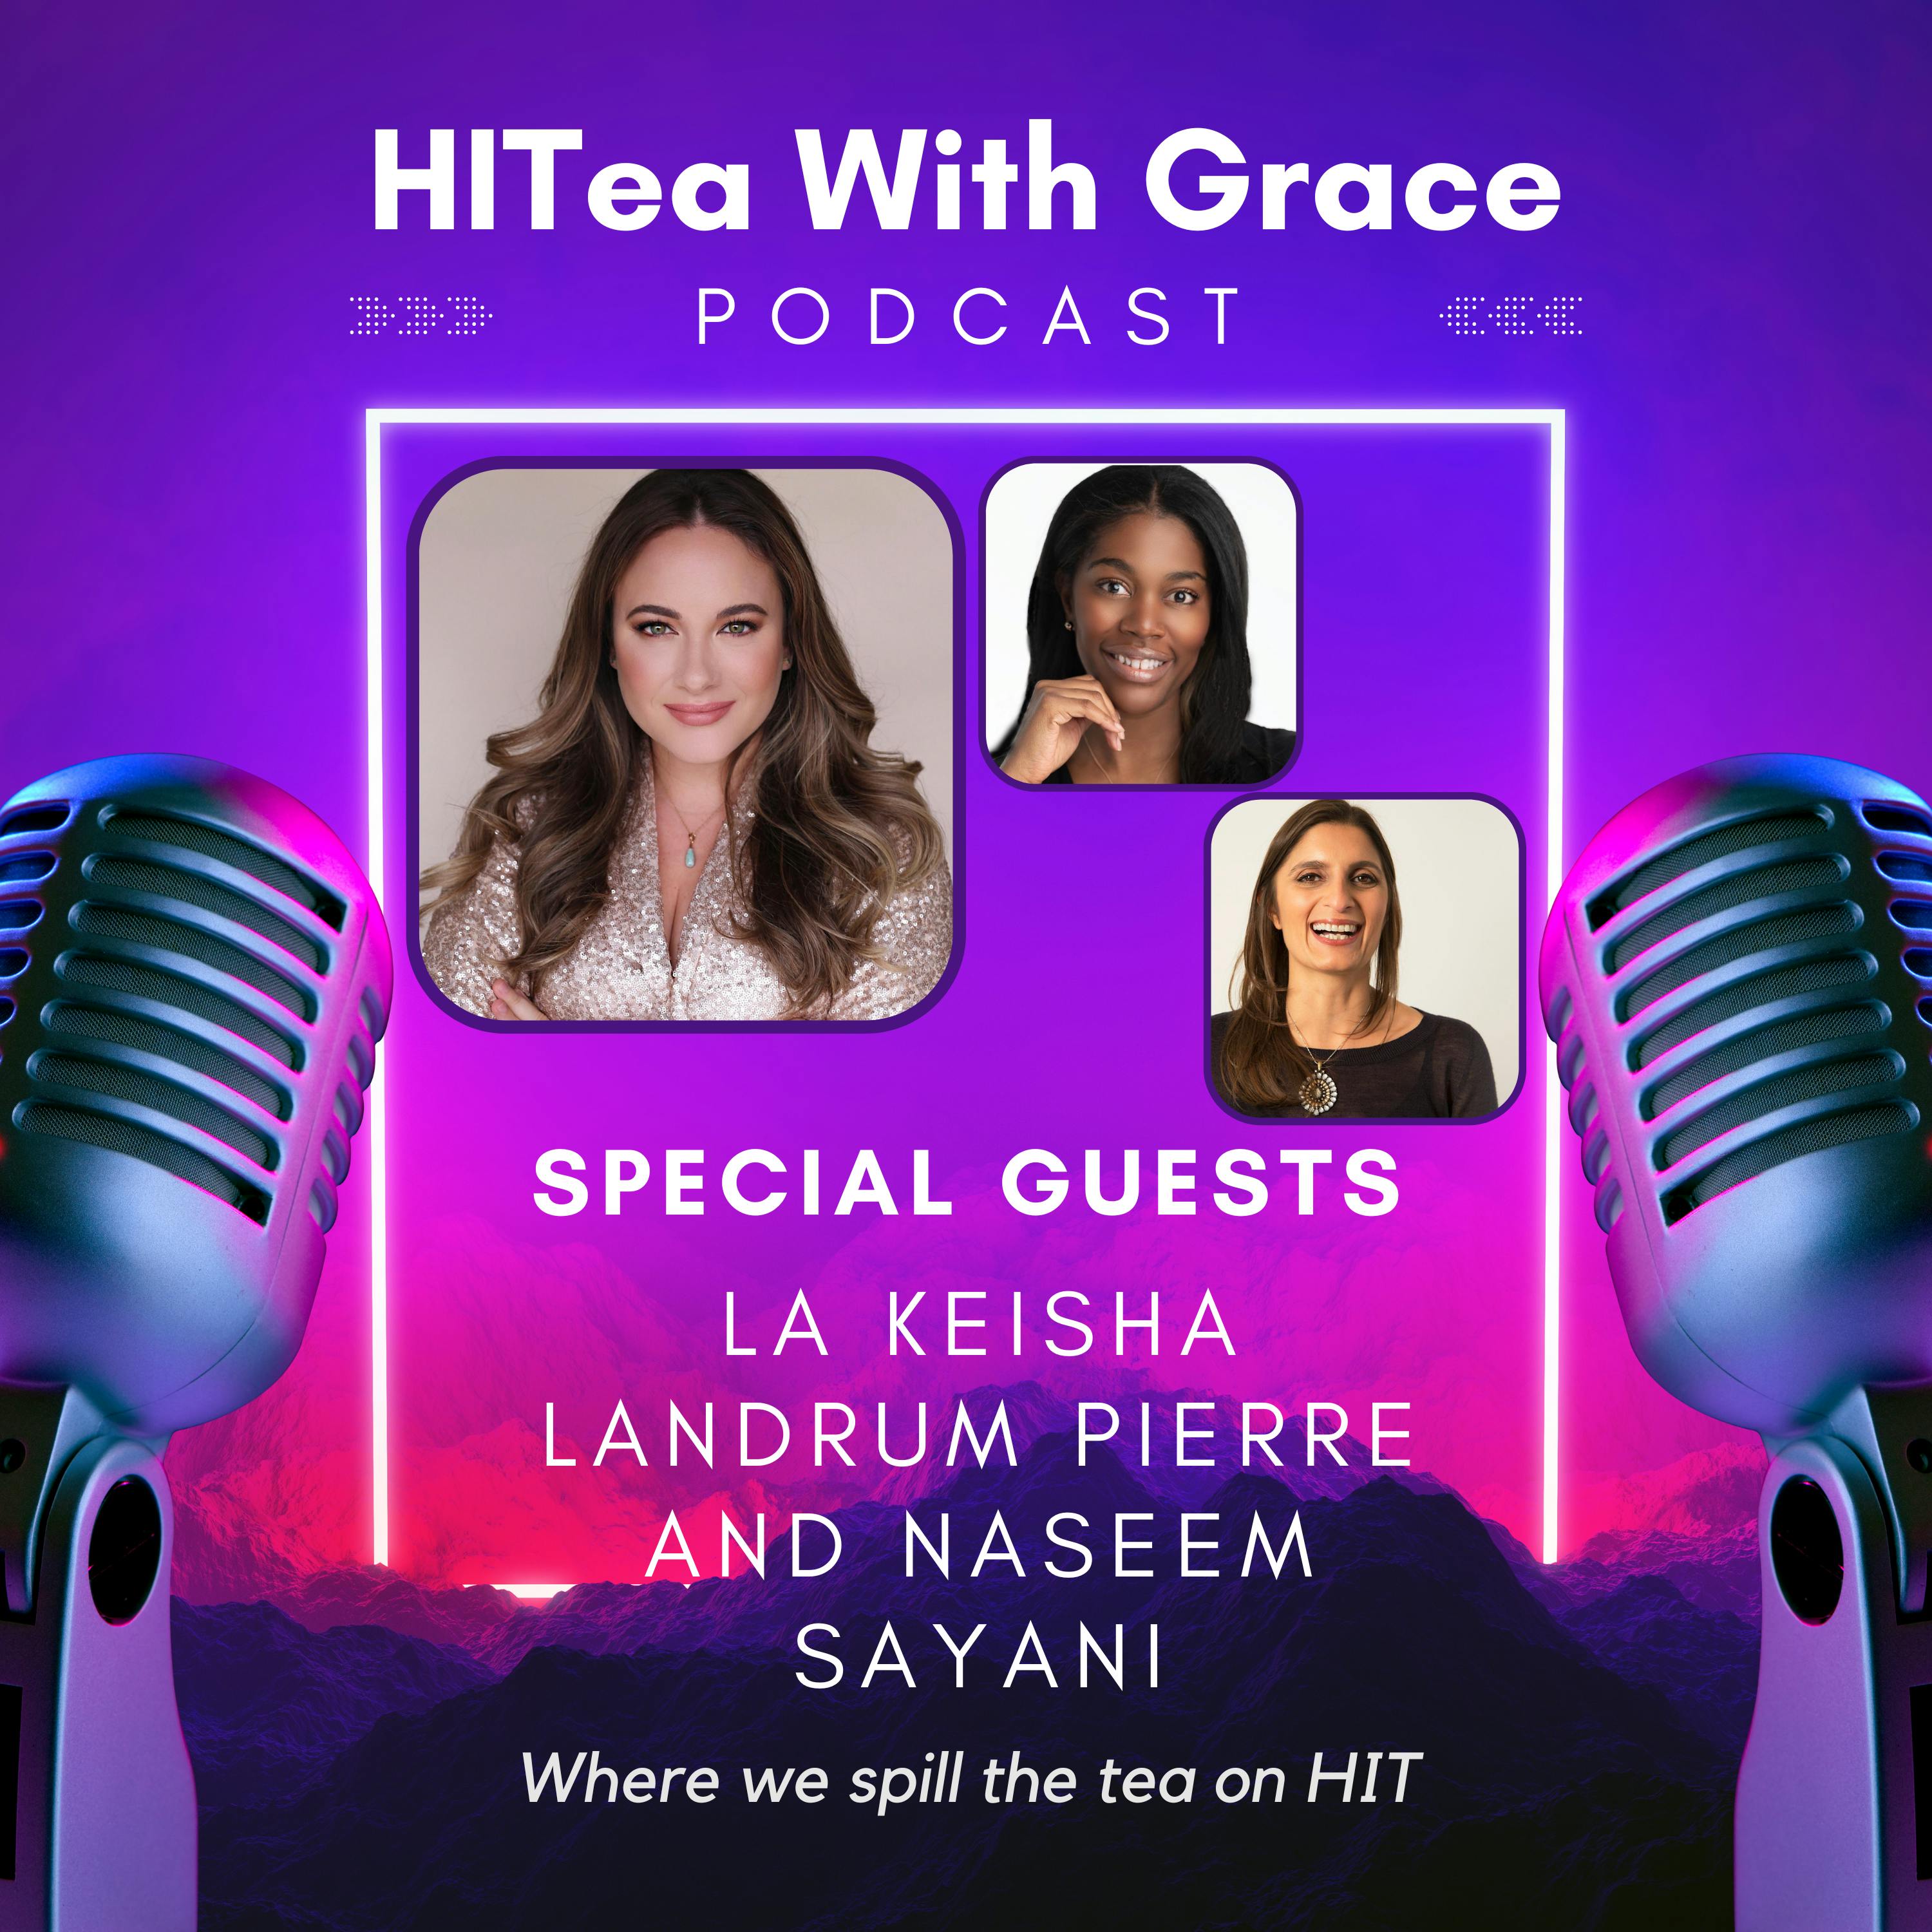 La Keisha Landrum Pierre & Naseem Sayani Spill the Tea on Women’s Health Research and Investment Trends